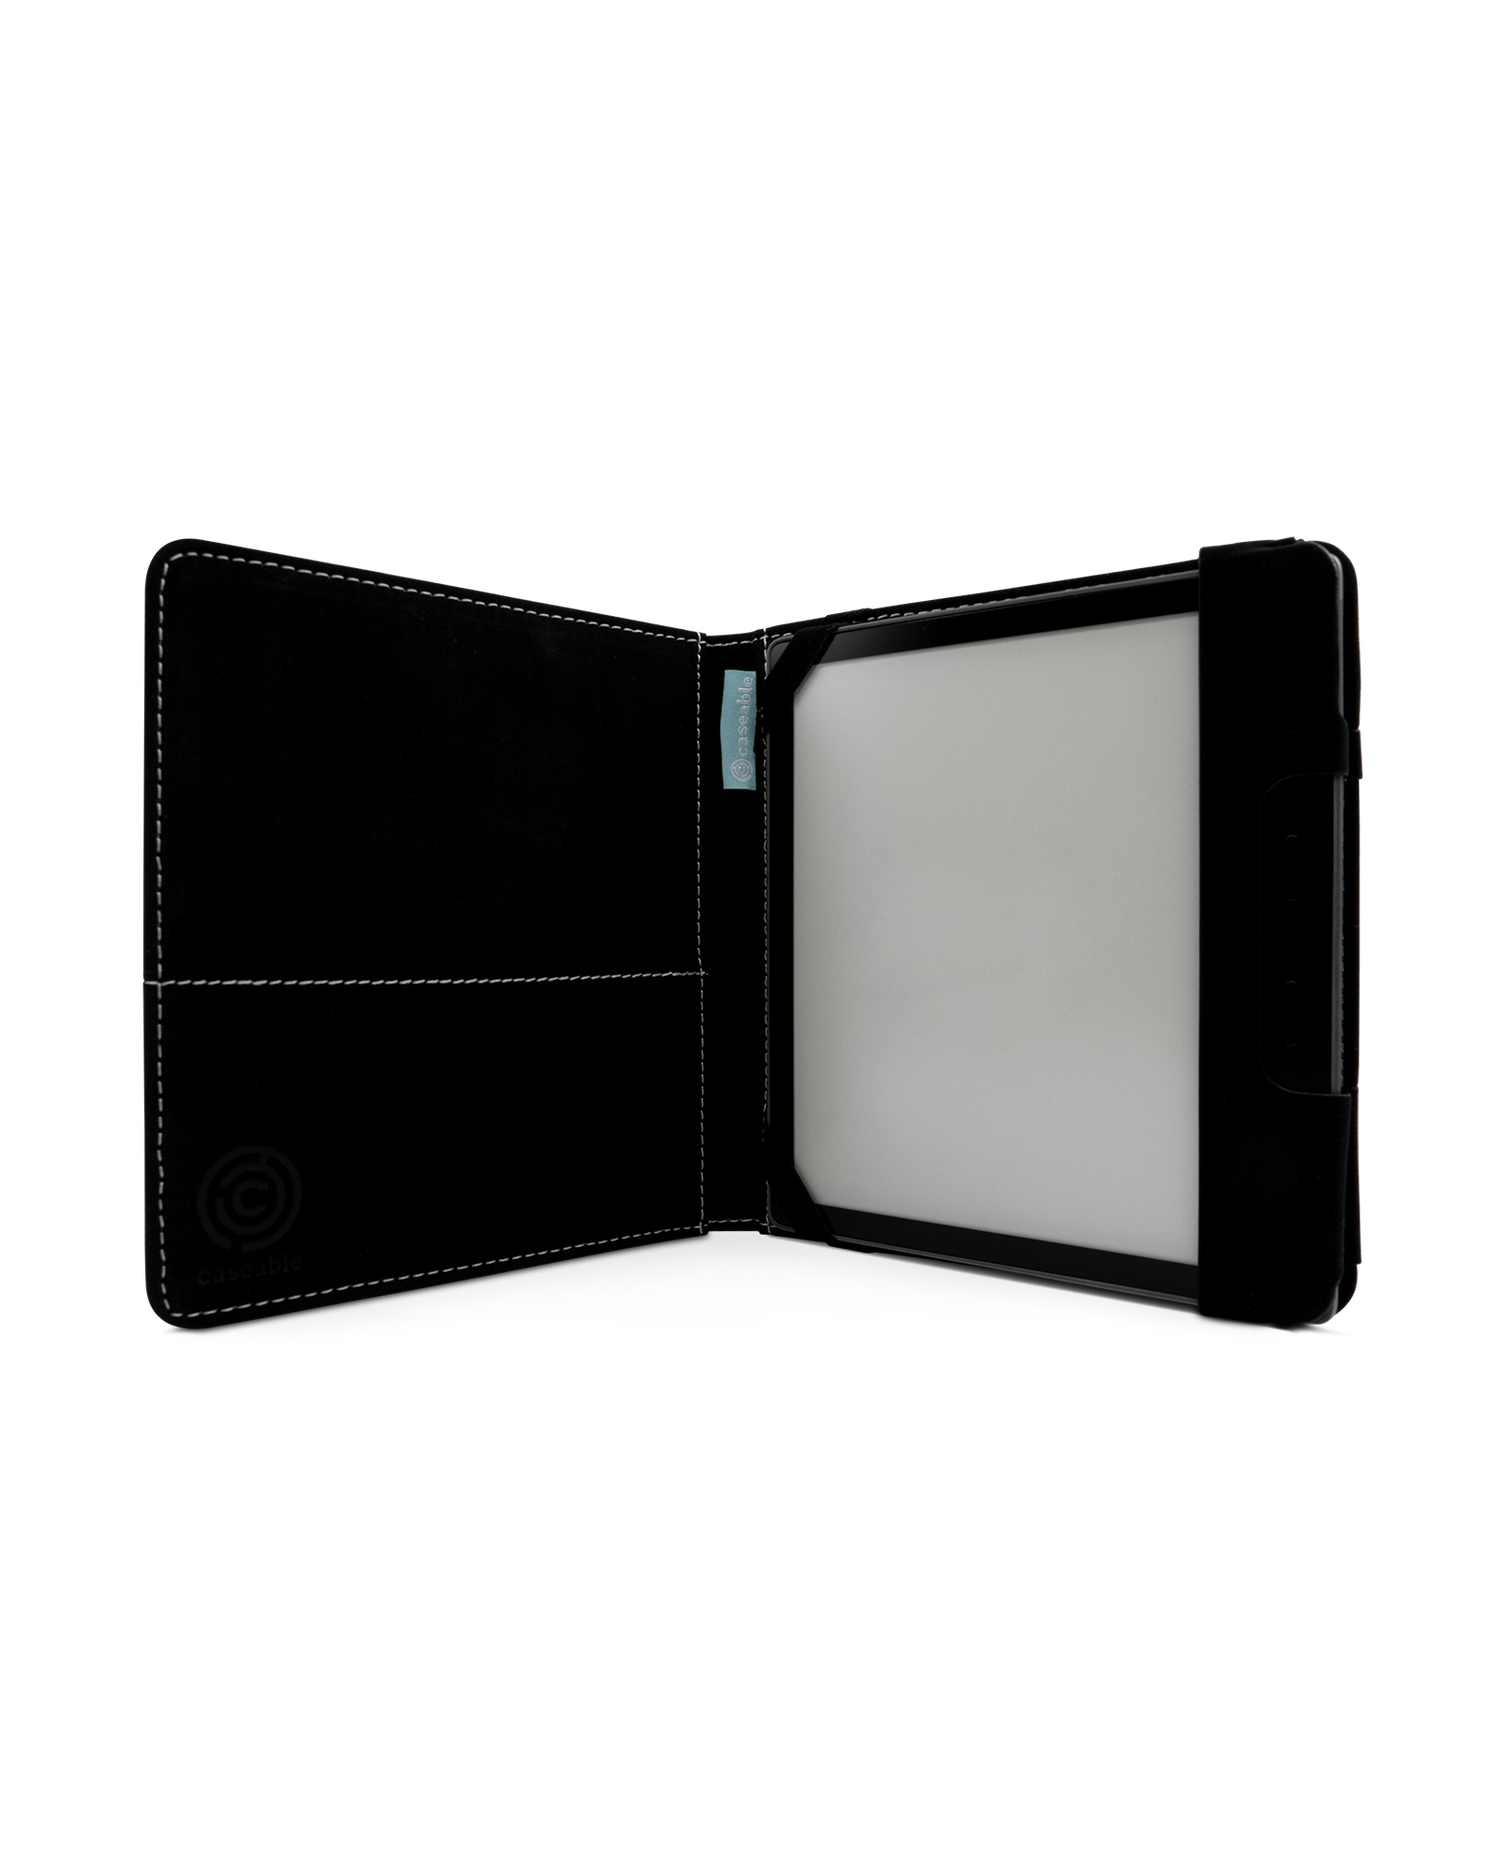 Sky eReader Case for tolino vision 6: Opened interior view